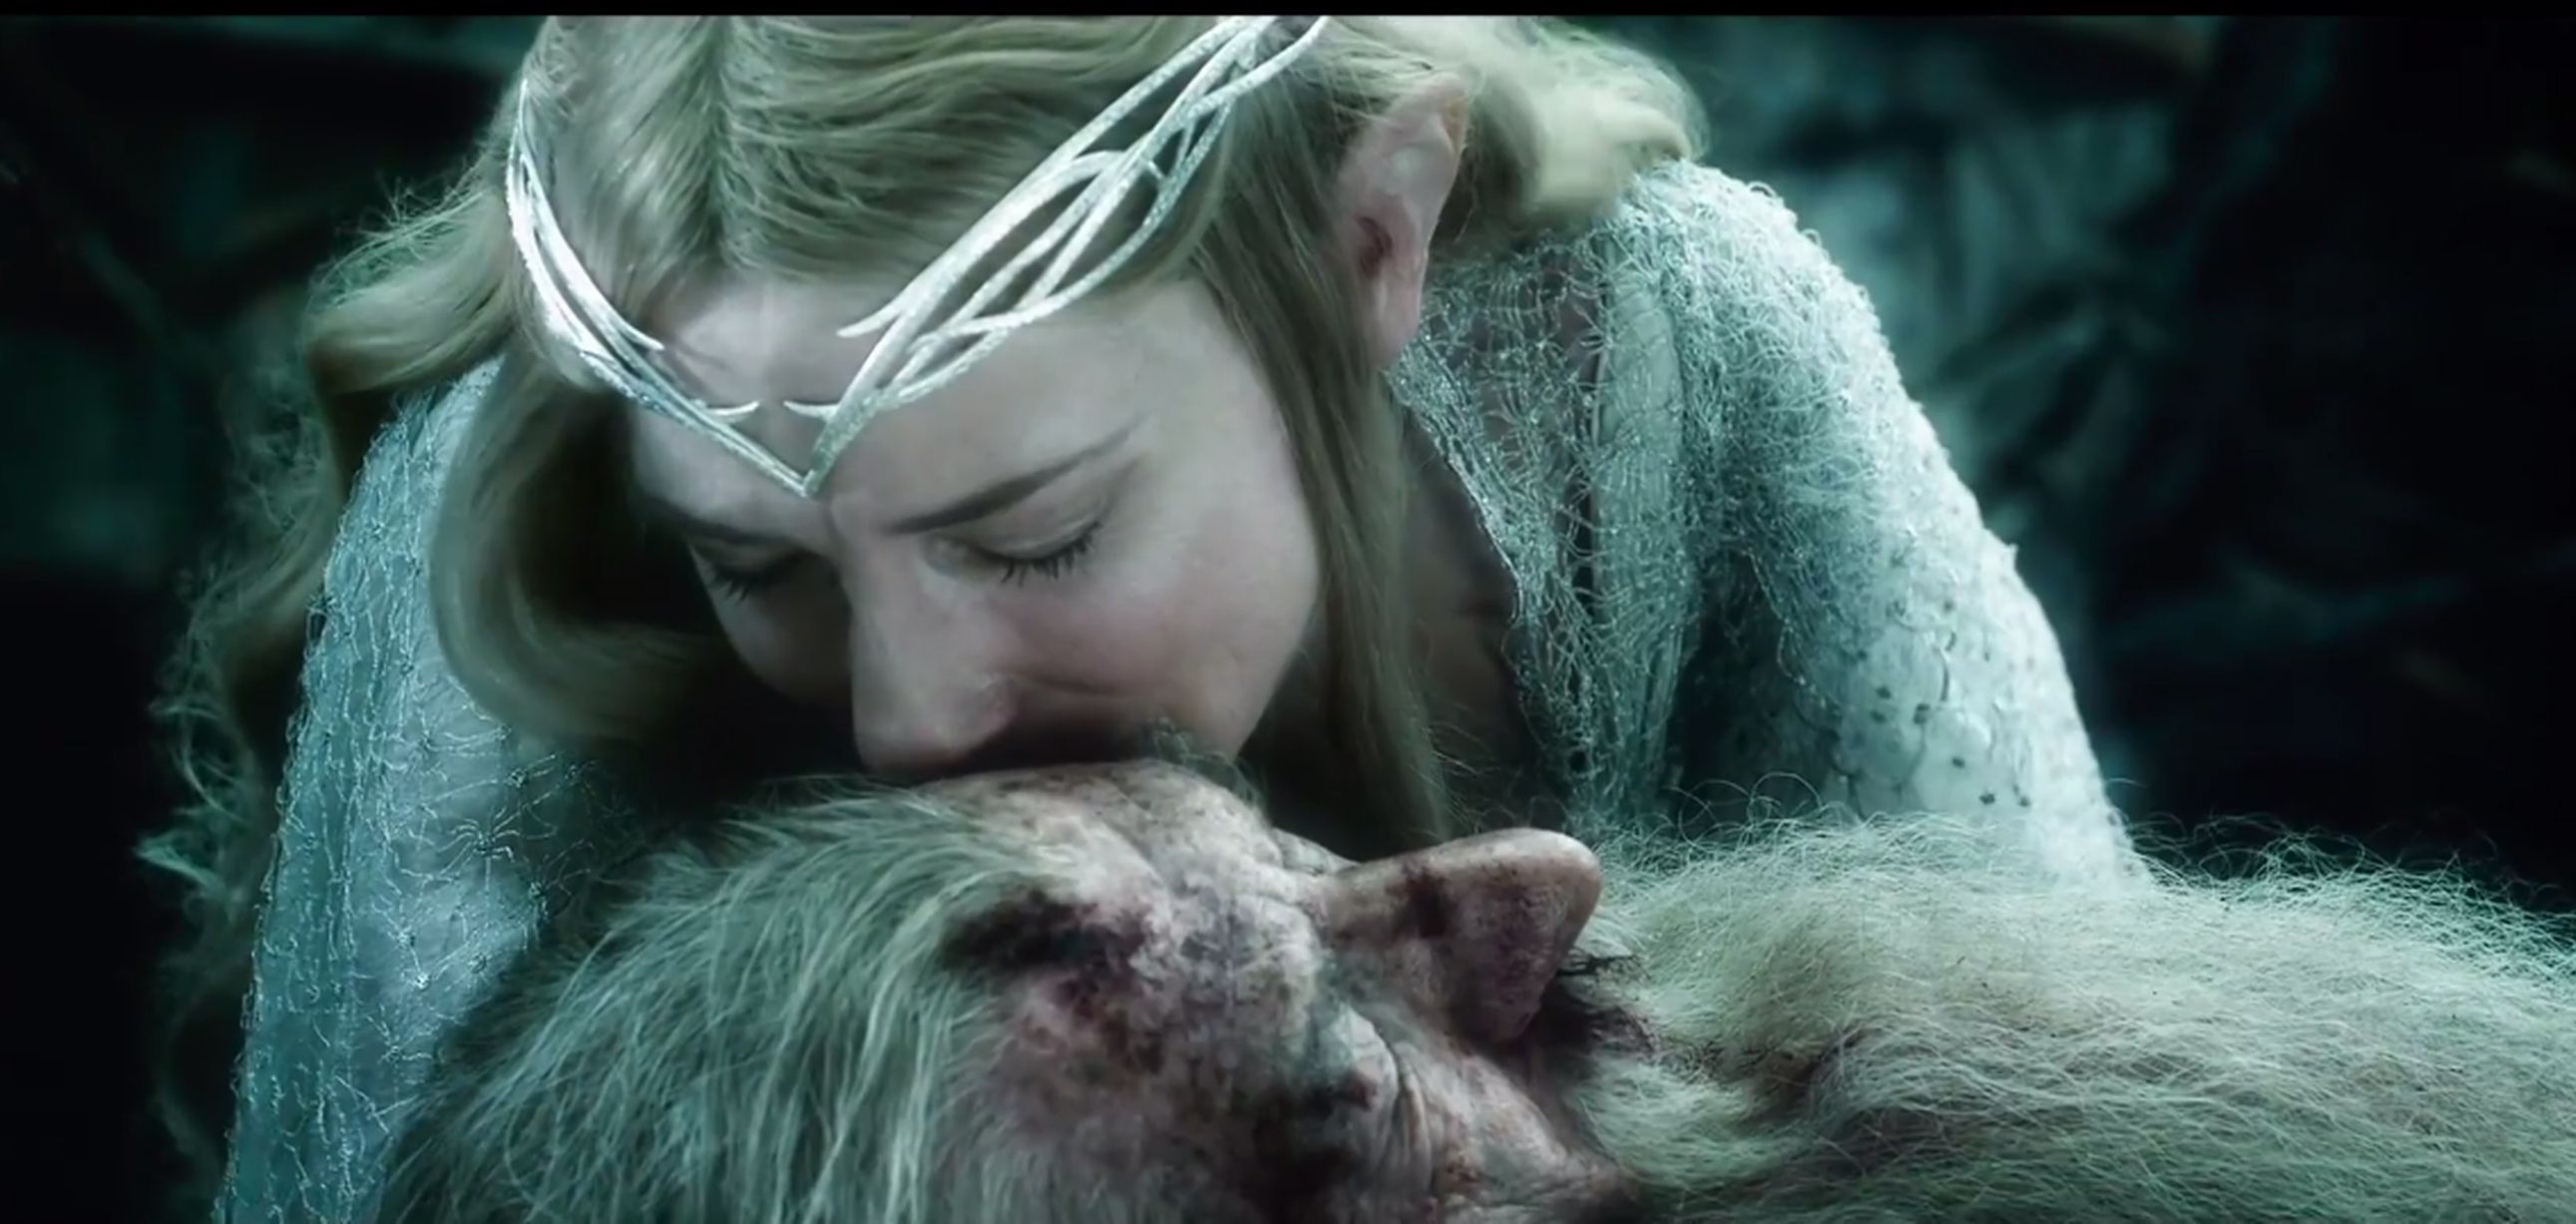 Tariel kisses forehead - The Battle of the Five Armies